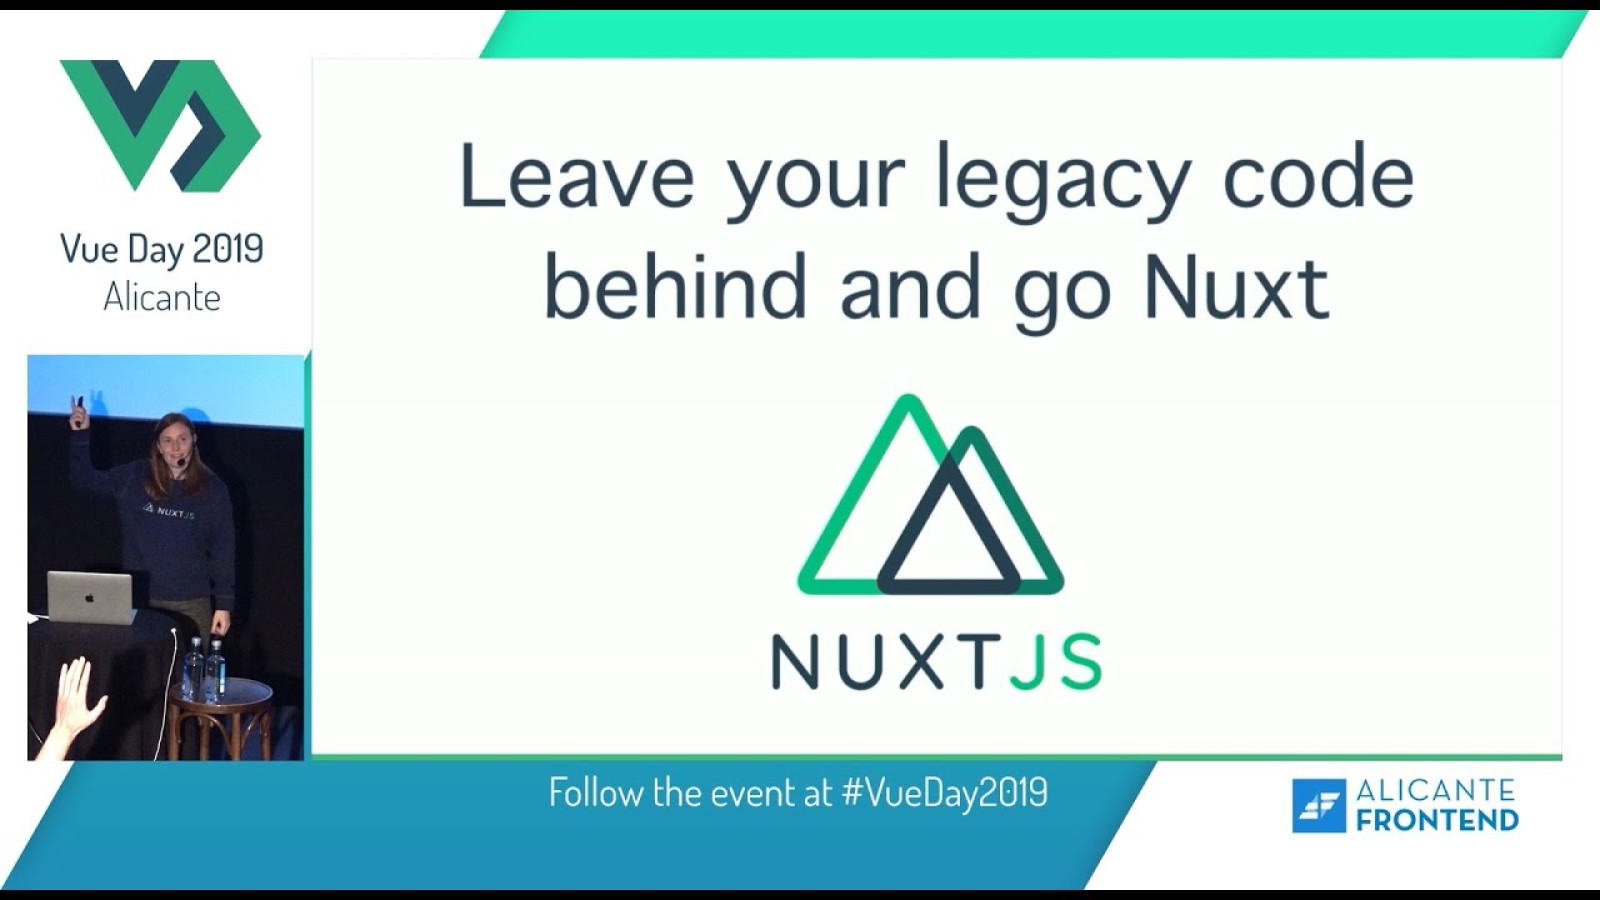 Leave your legacy code behind and go Nuxt